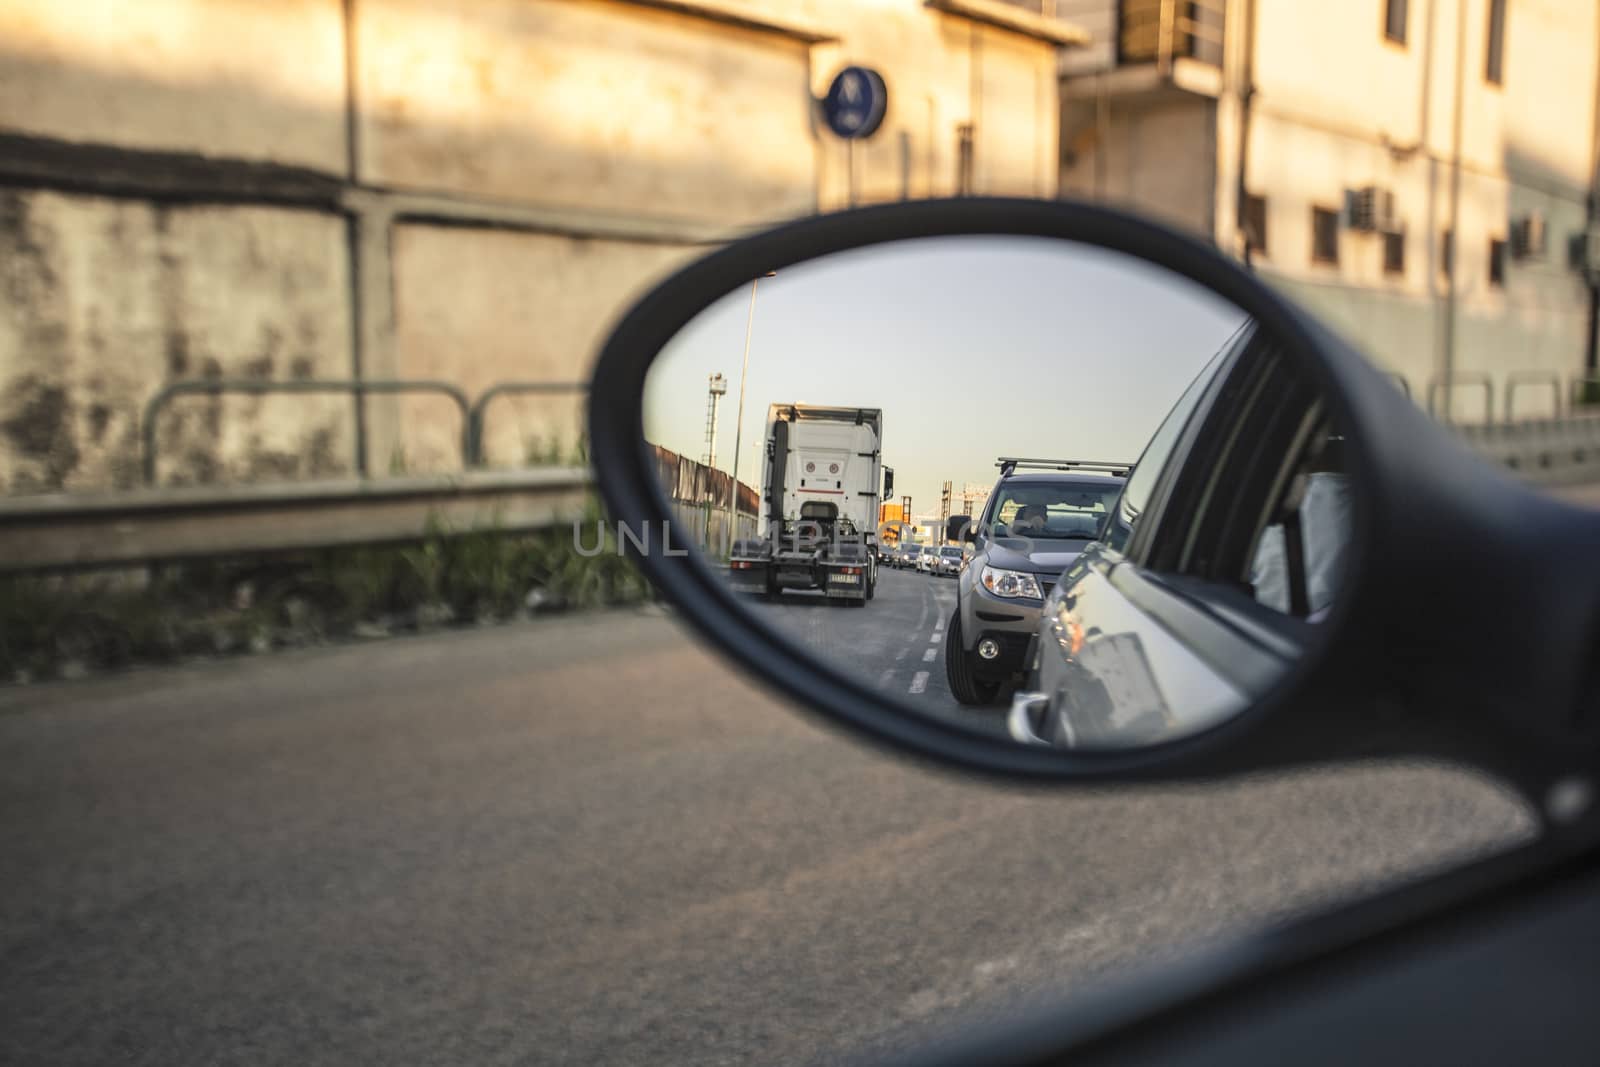 Road traffic seen in the rear-view mirror